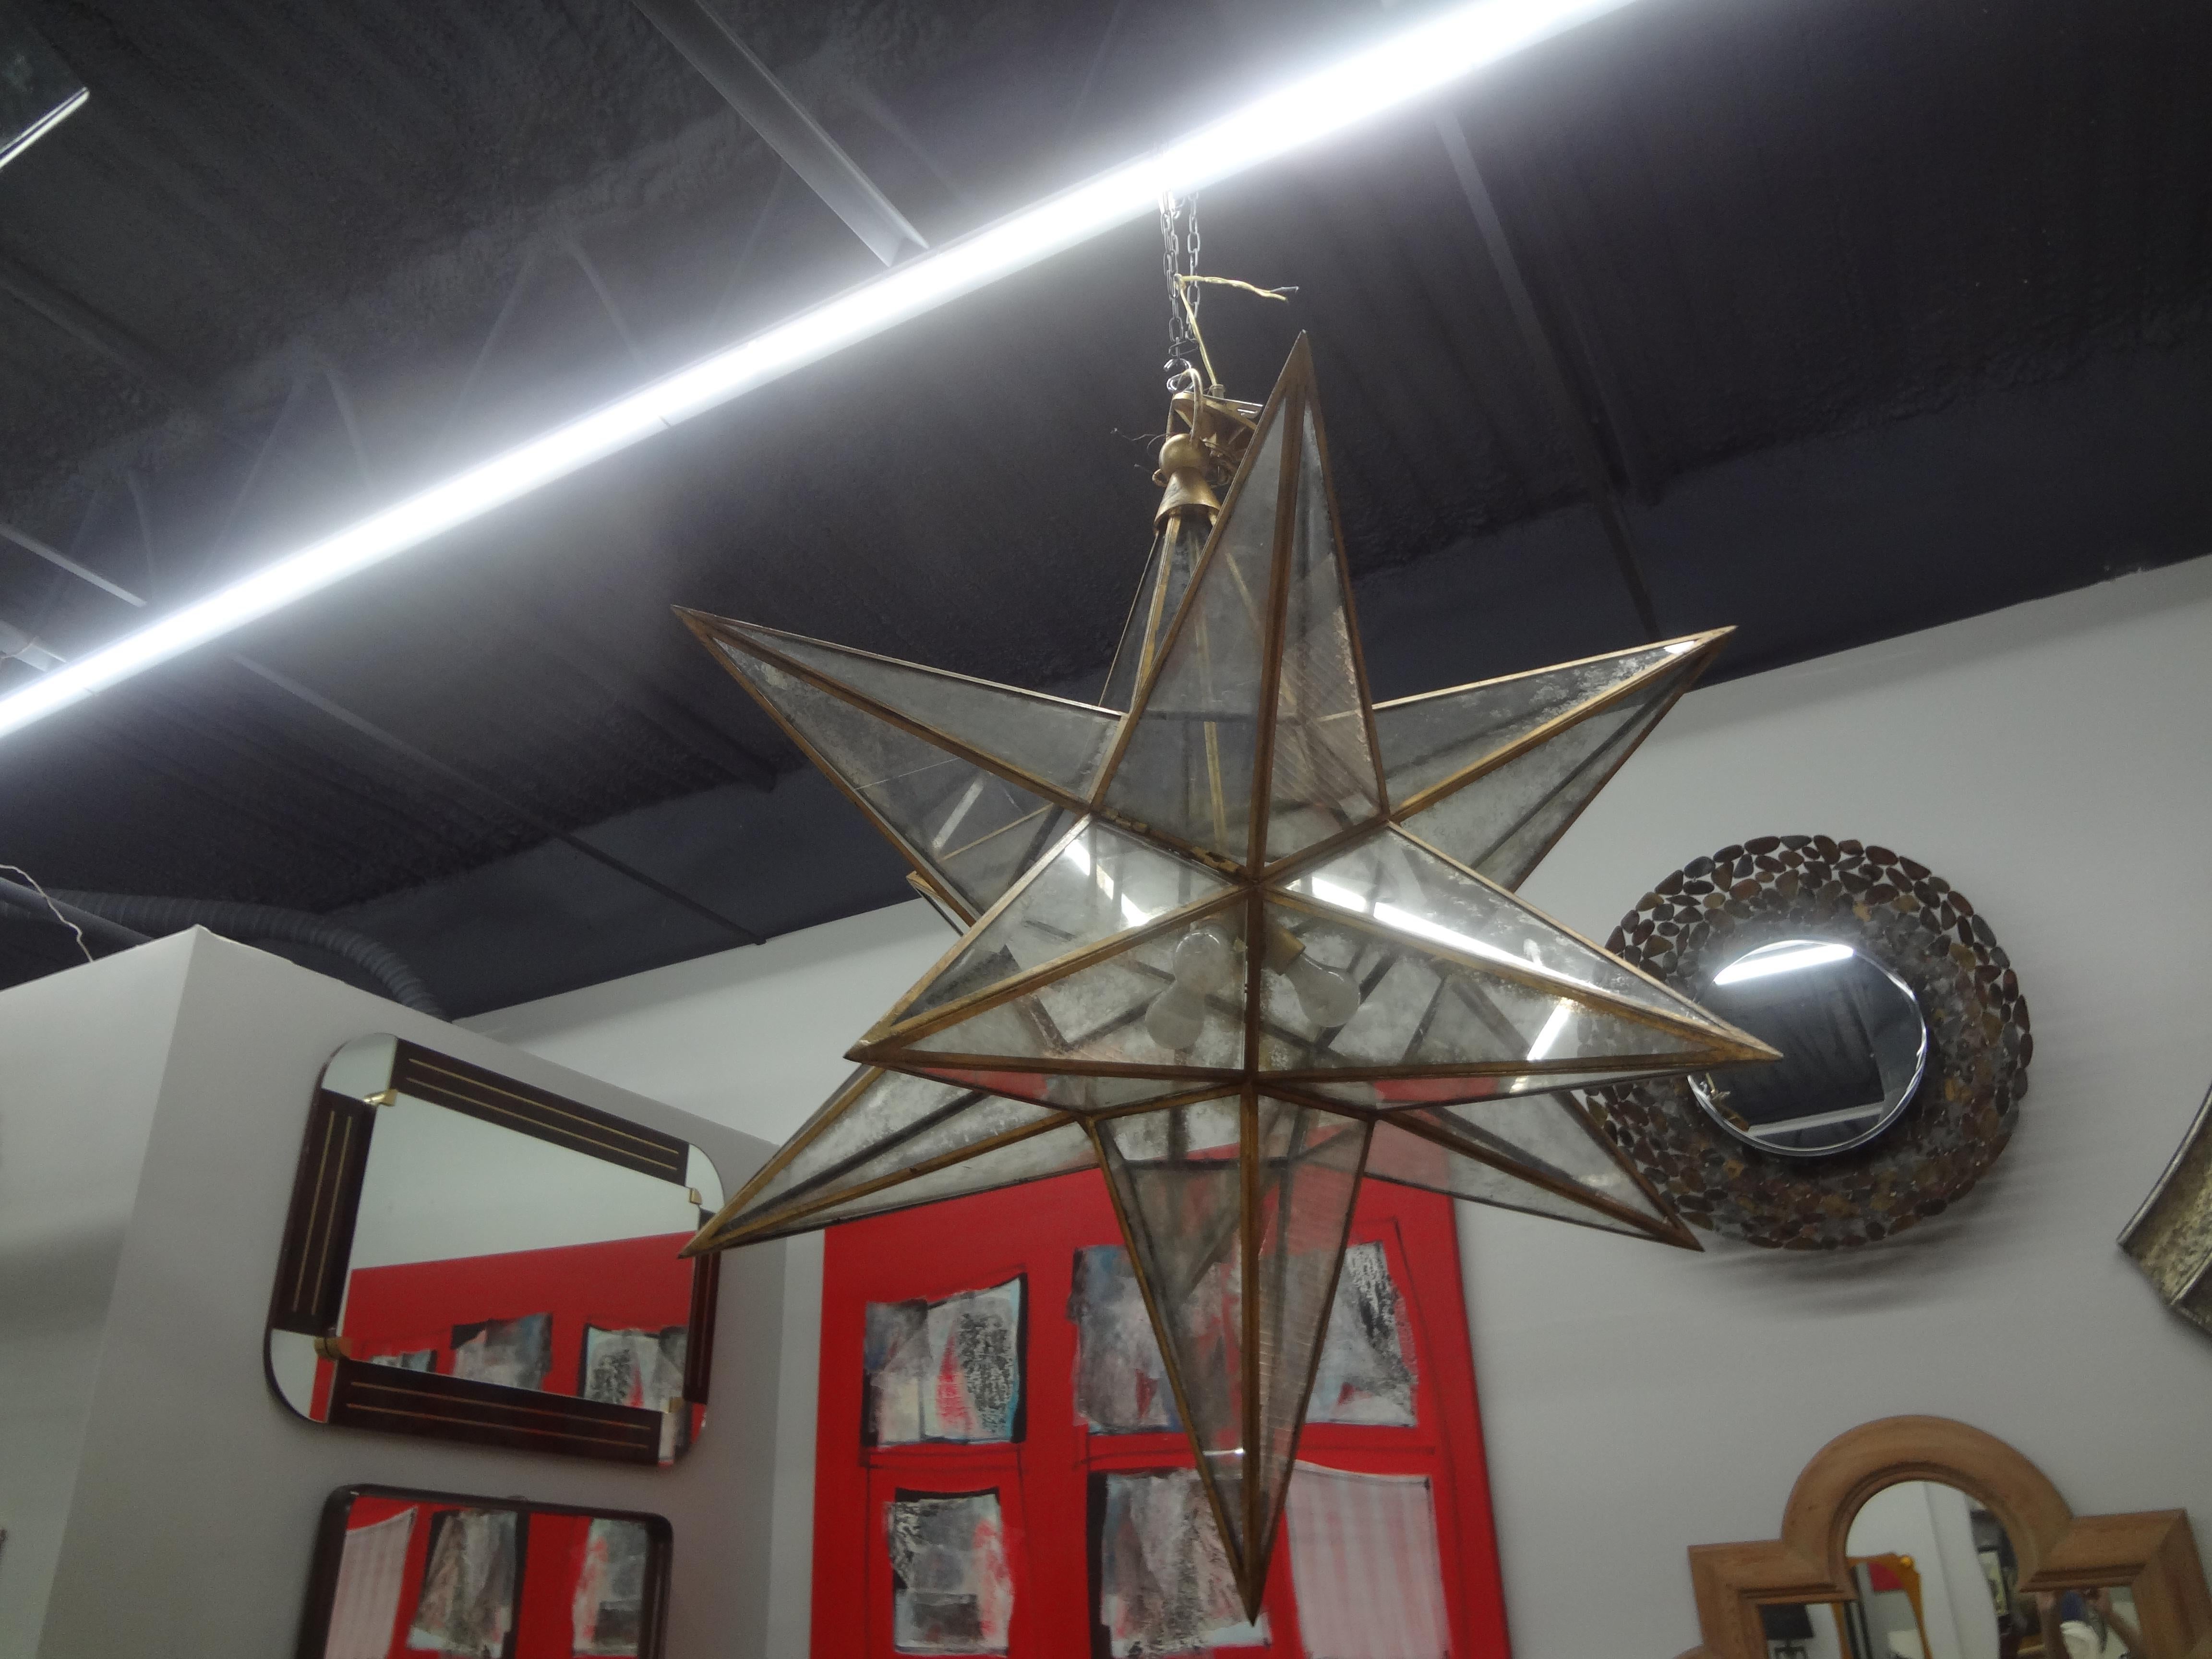 Monumental 52 Inch Star Shaped Chandelier.
This outstanding 20th century star shaped chandelier, possibly Italian is made of gilt metal with lightly mirrored panels. It retains the original canopy and chain. Dimensions given are excluding the chain